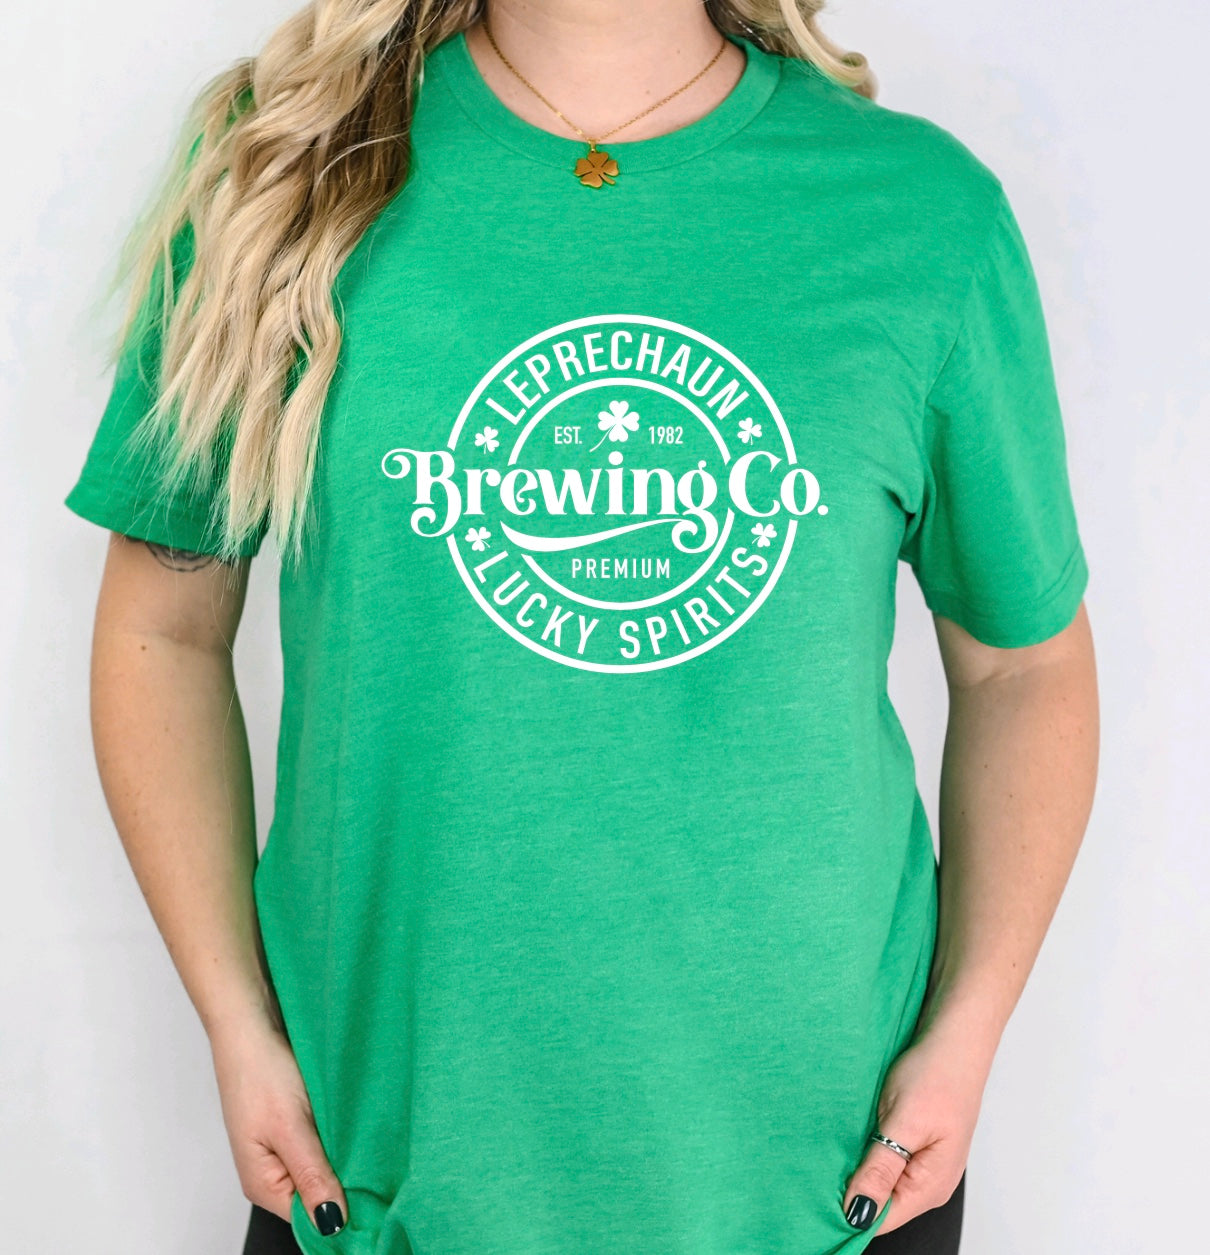 Leprechaun brewing company st patty’s day unisex t-shirt for women in heather green